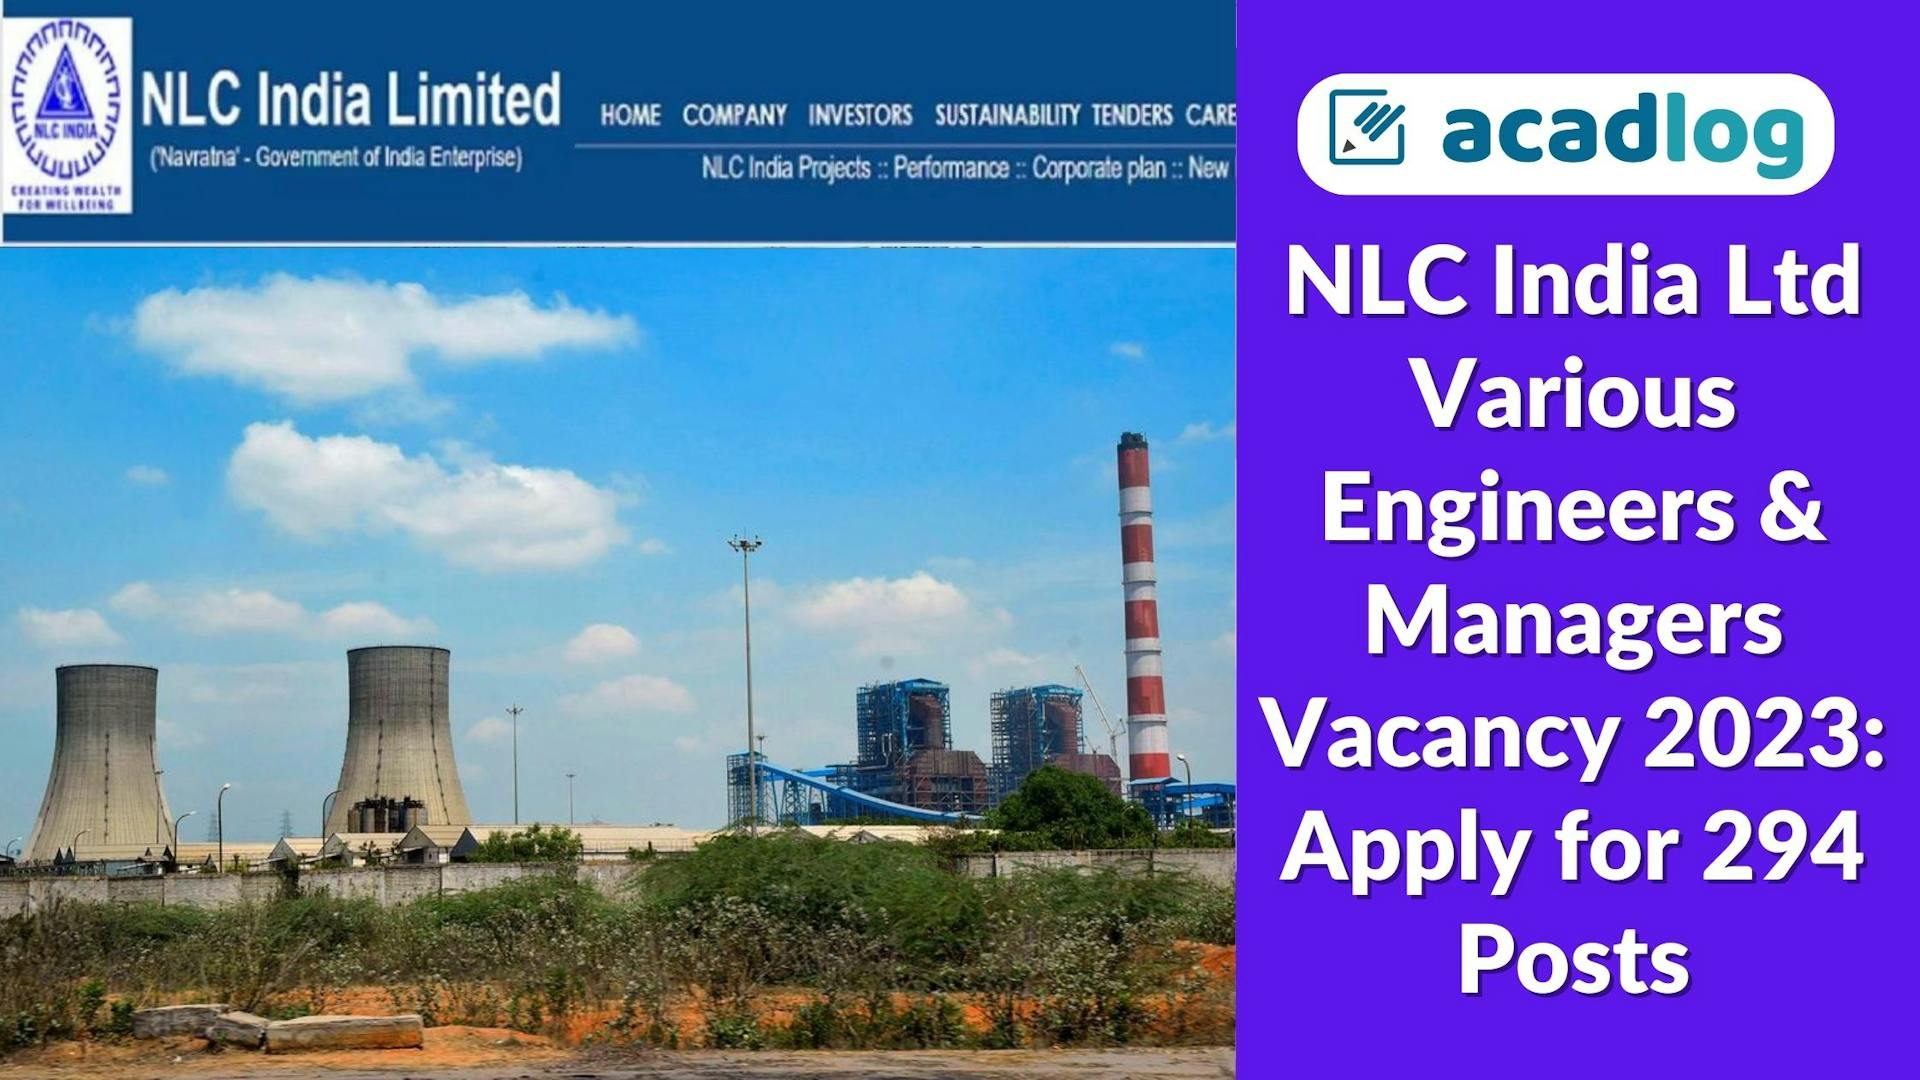 NLC India Ltd Various Engineers & Managers Vacancy 2023: Apply for 294 Posts